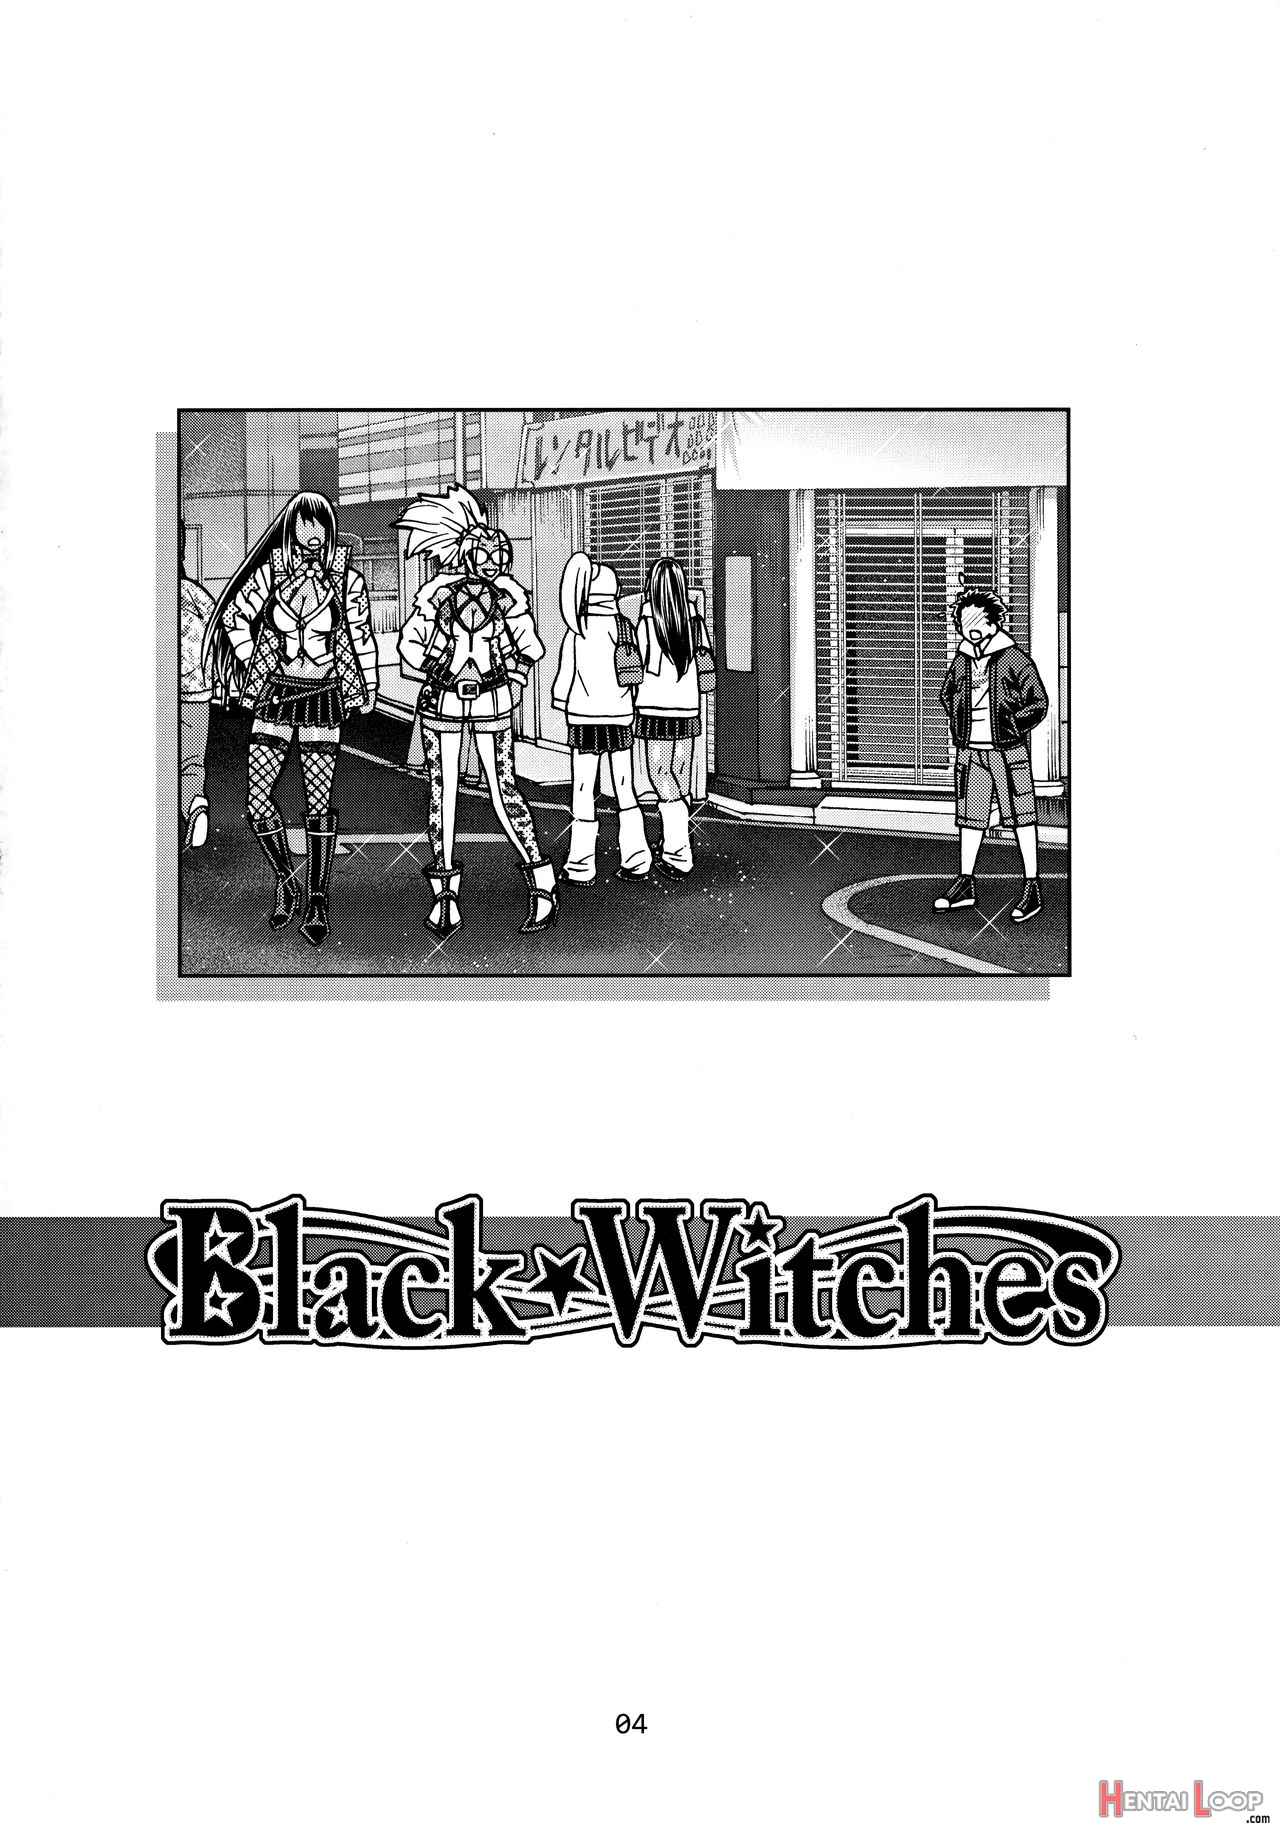 Black Witches 3 =tll + Mrwayne= page 3